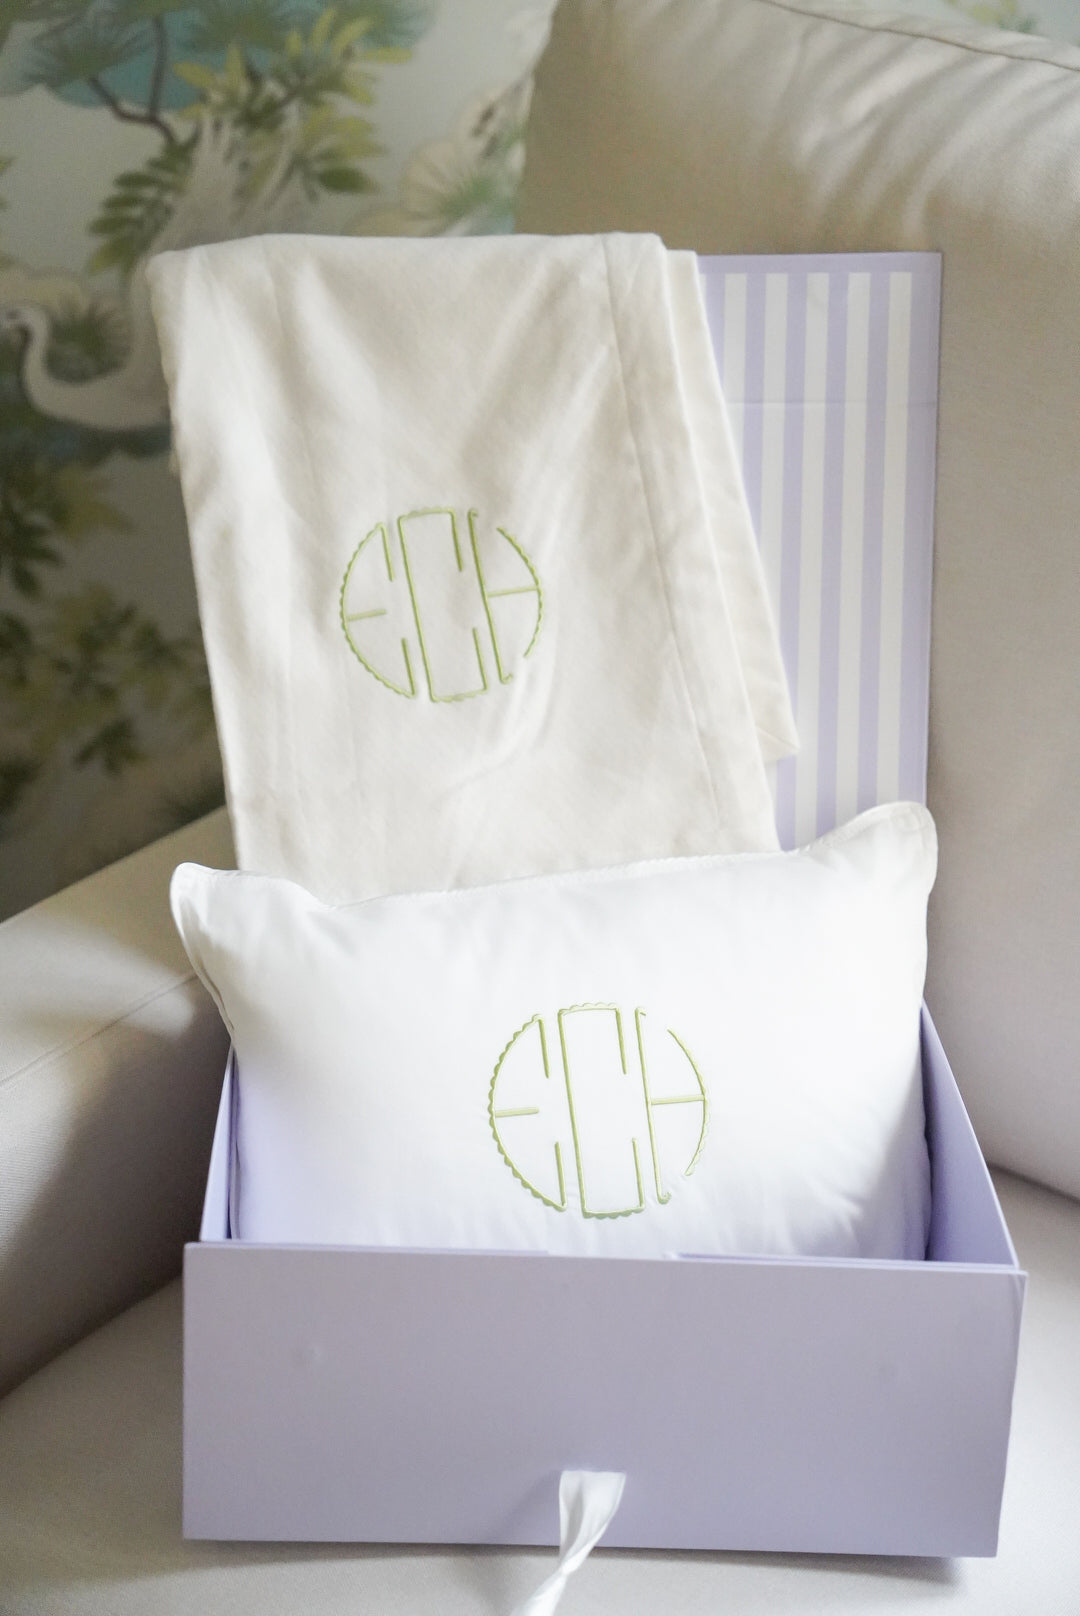 Caption: Monogram style is Scallop with Peridot thread. Bundle comes in our Large Lavender Gift Box.